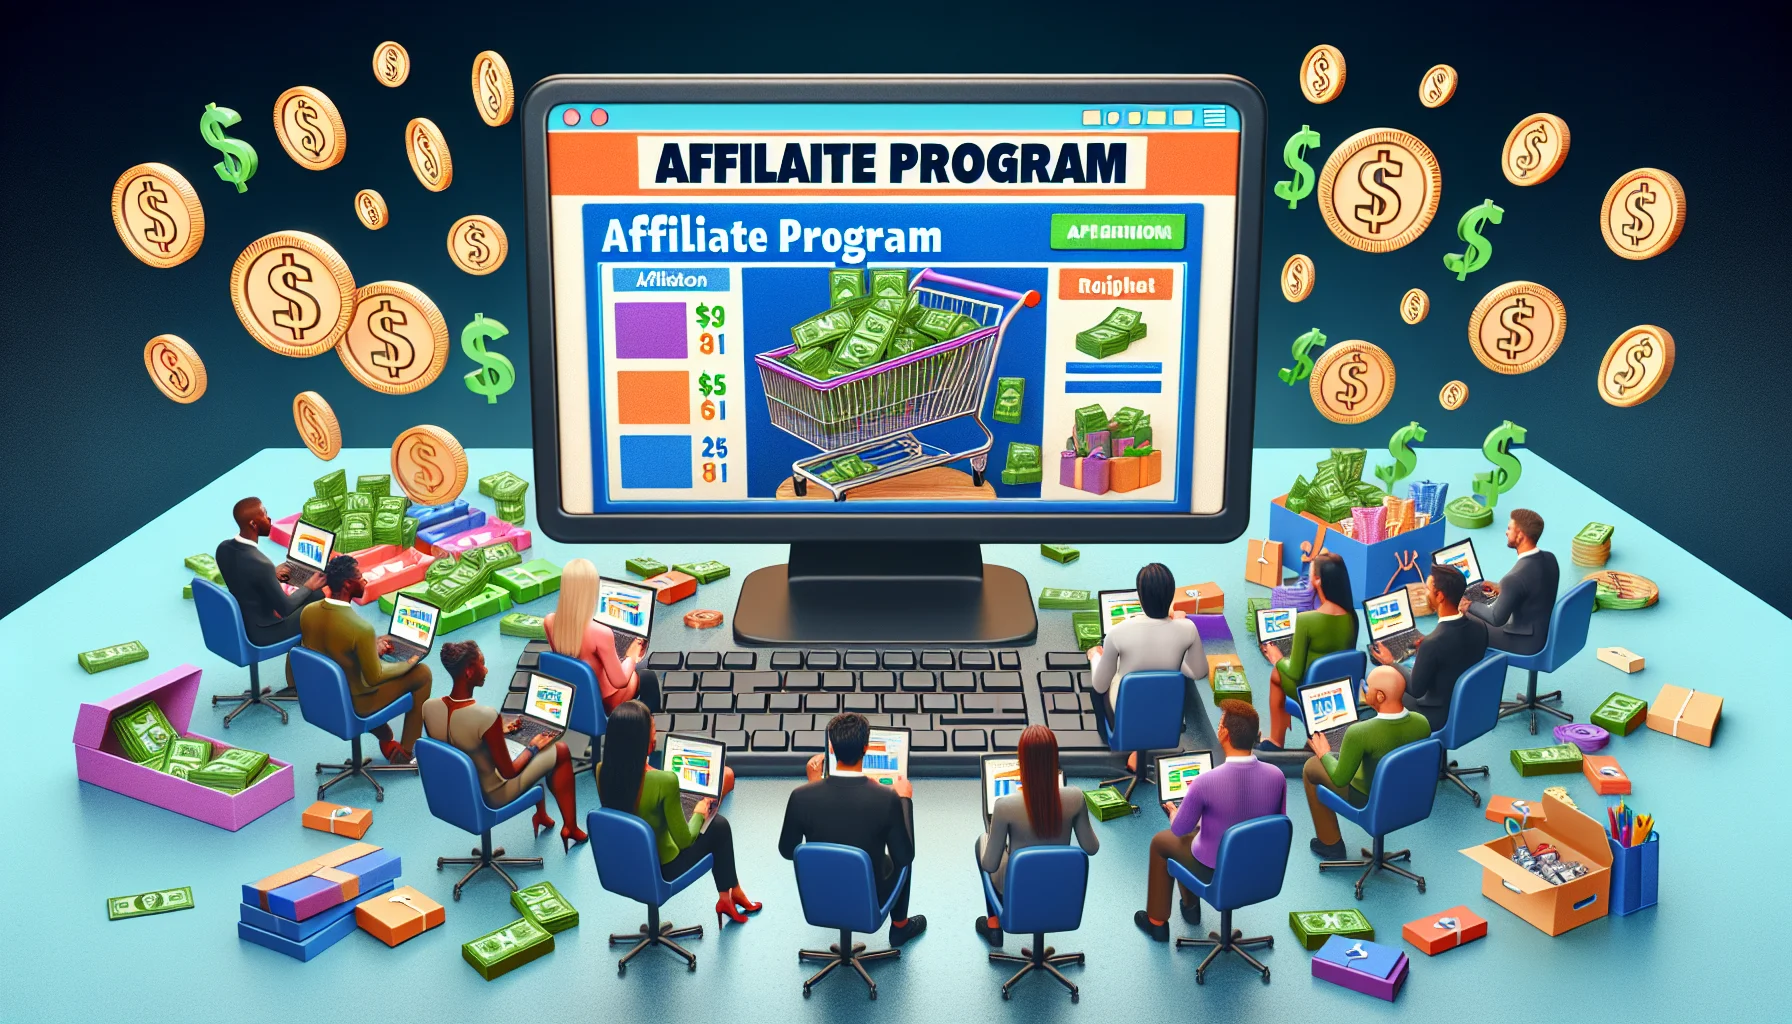 Generate a humorous, realistic image that showcases an affiliate program for a popular discount retailer. The scene is set in the context of making money online. At the centre, there should be an engaging computer screen displaying a brightly colored 'Affiliate Program' webpage for the retailer industry. The page should include enticing visuals like shopping carts full of discounted items, and dollar signs indicating earning potential. Surrounding the computer, various individuals from different descents including Caucasian, Black, and Hispanic, and of both genders excitedly engaging with the website, perhaps clicking on affiliate links or reacting to their online earnings.